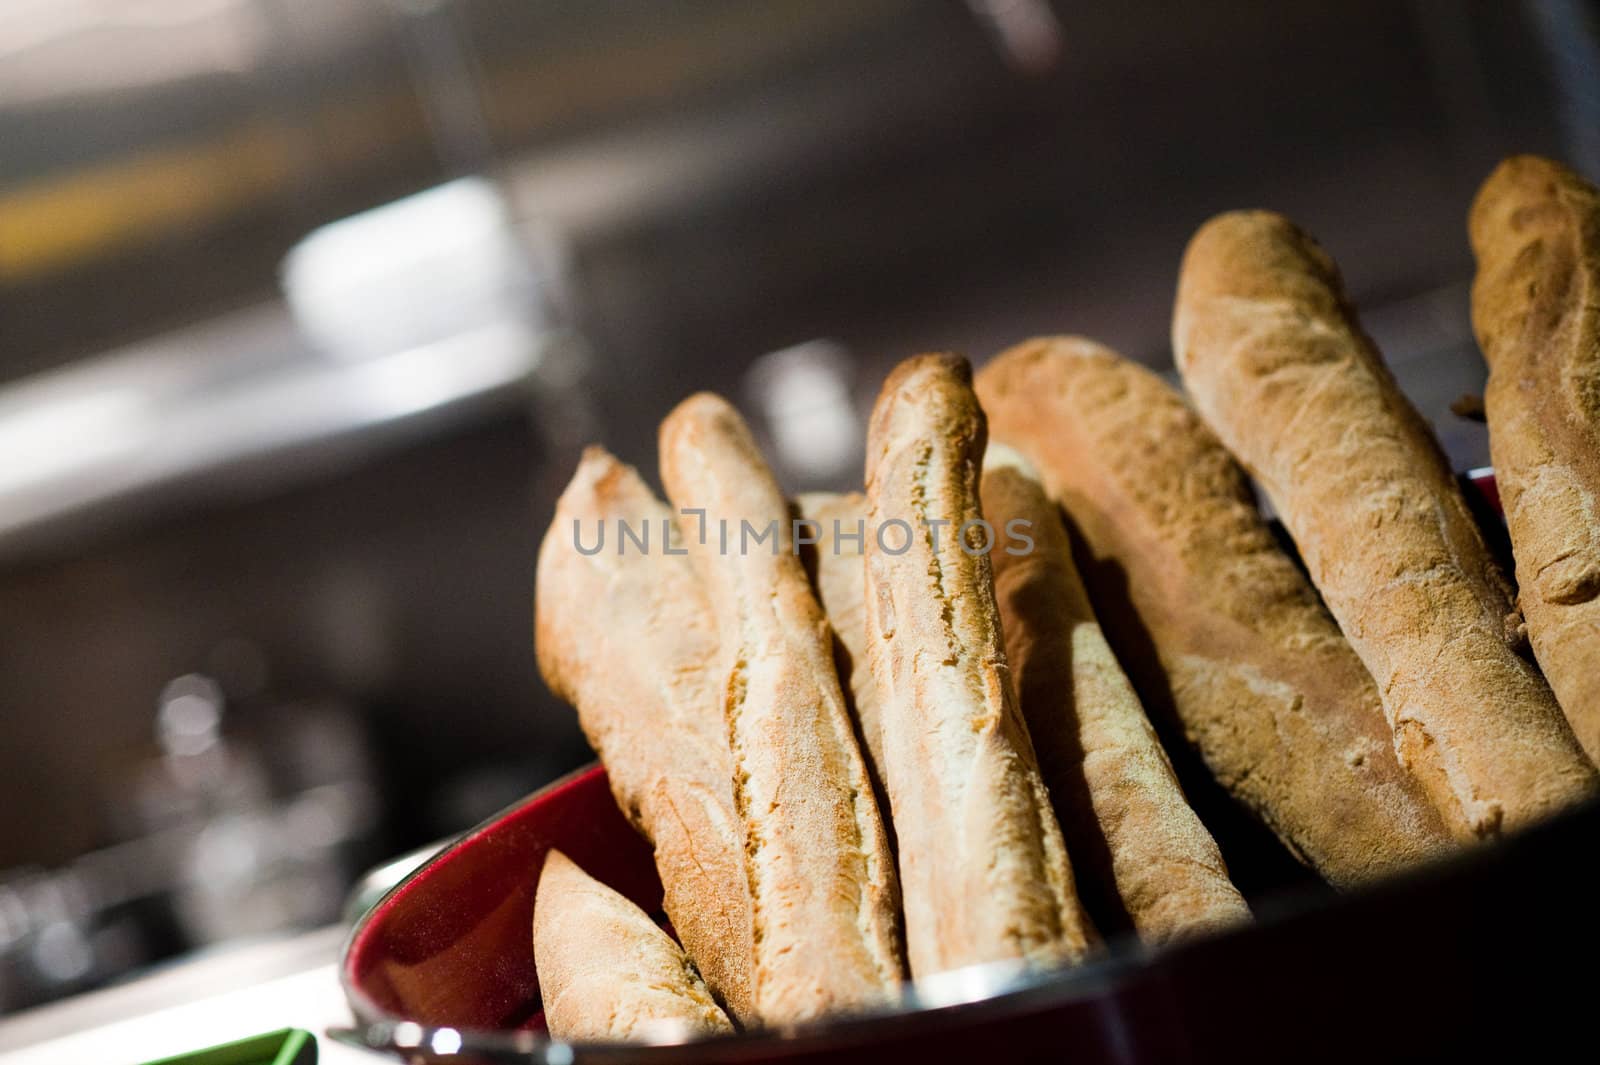 Rustic French baguettes ready for serving in a restaurant